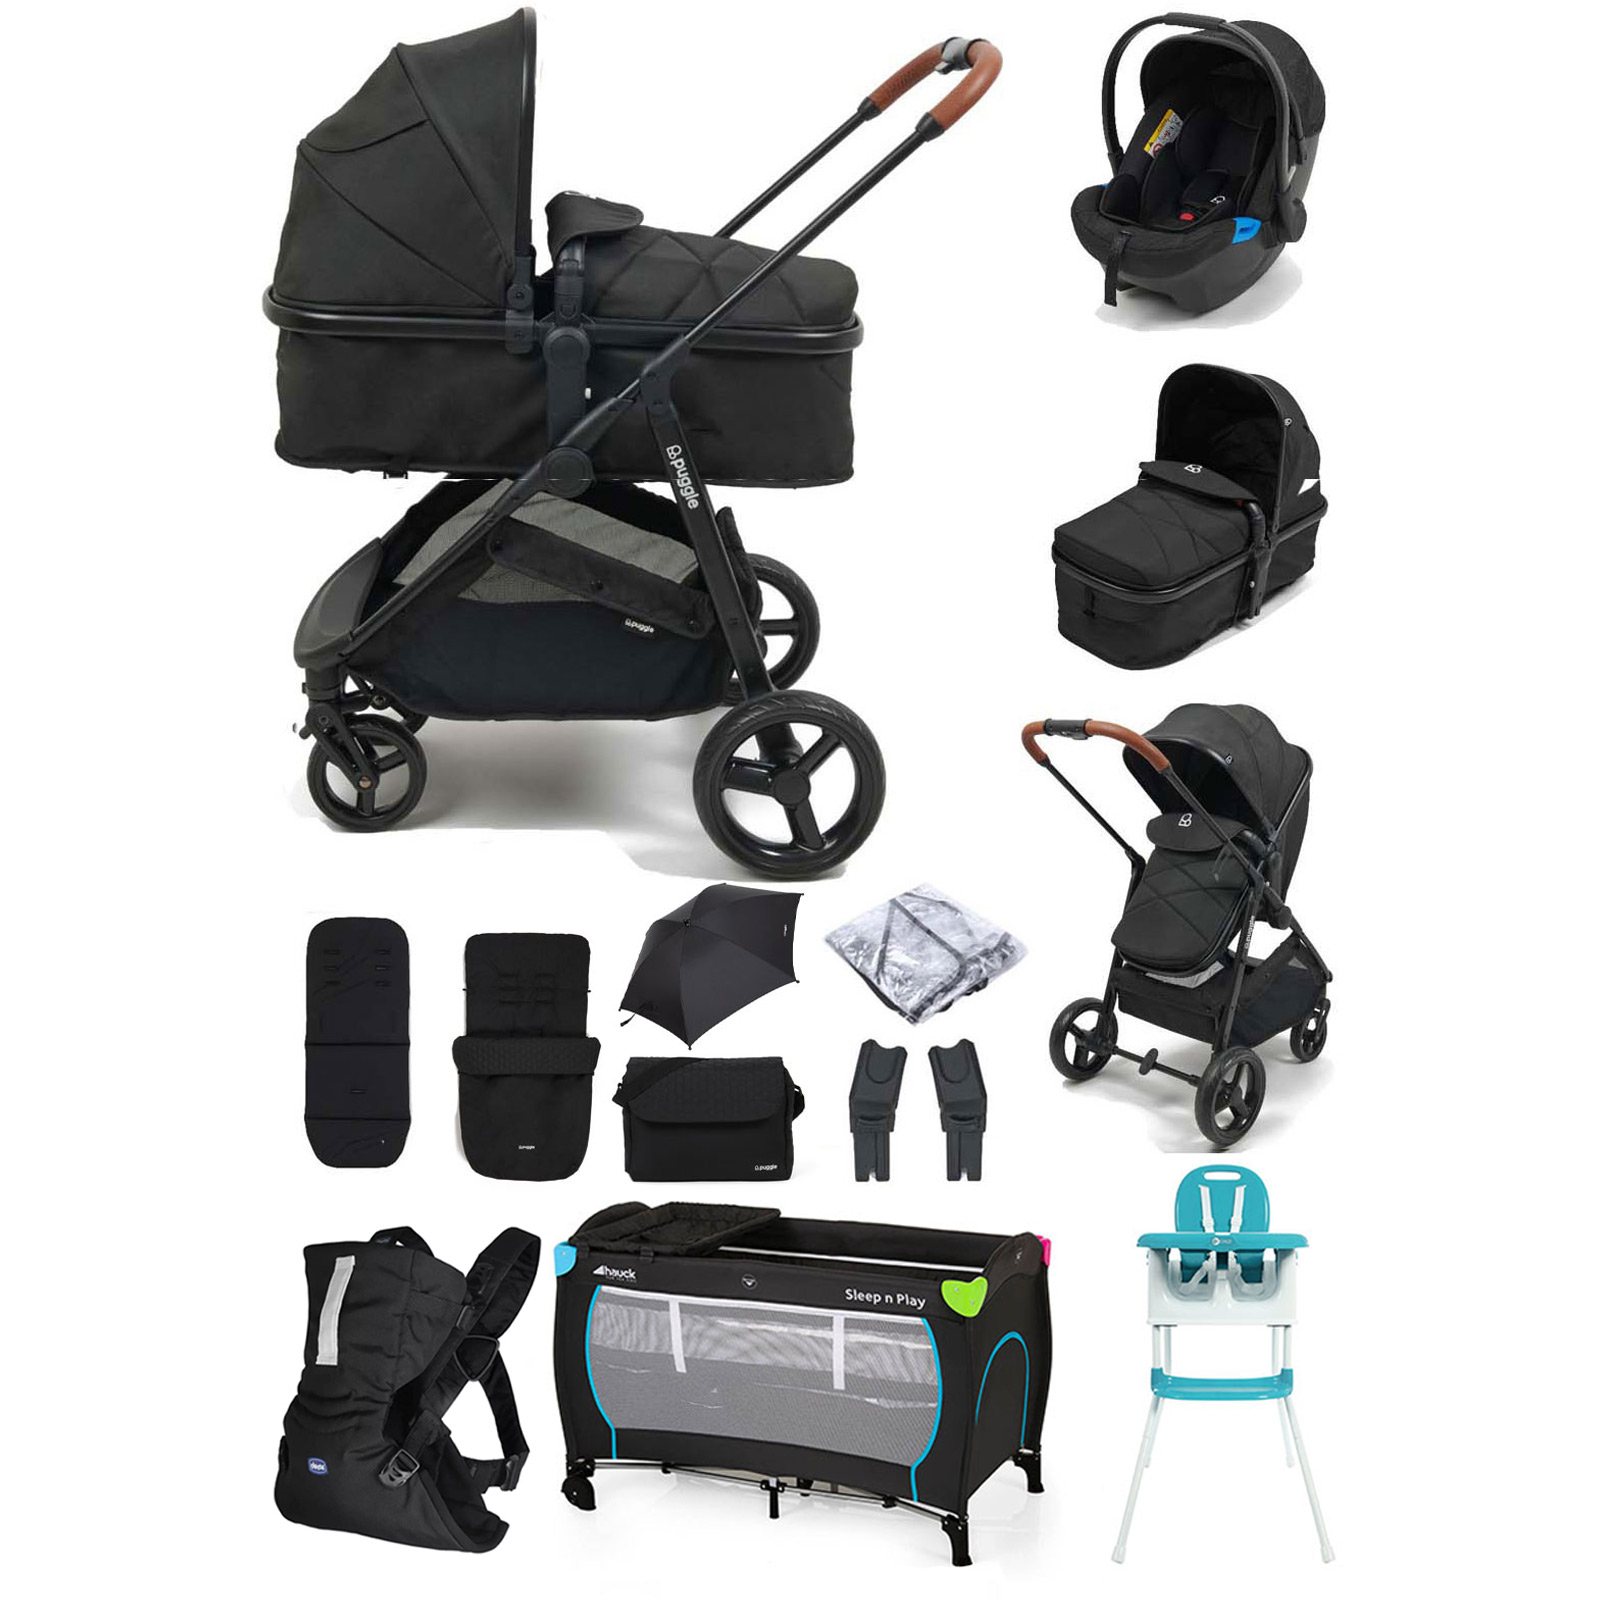 Puggle Monaco XT 2in1 Pram Pushchair Everything You Need Travel System with Footmuff, Changing Bag & Parasol - Storm Black